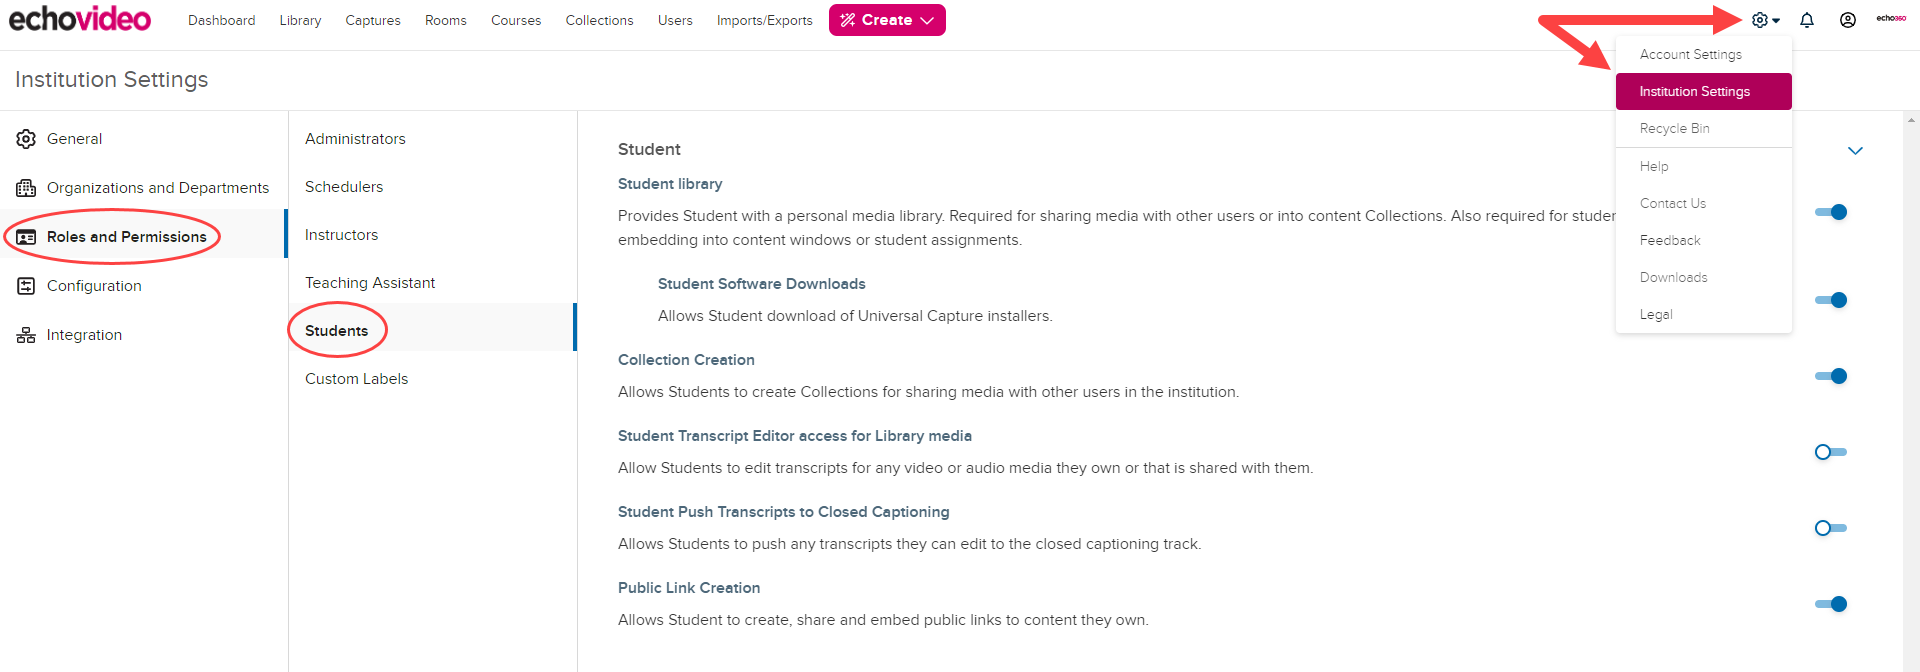 Roles and Permissions Student page with navigation identified for steps as described